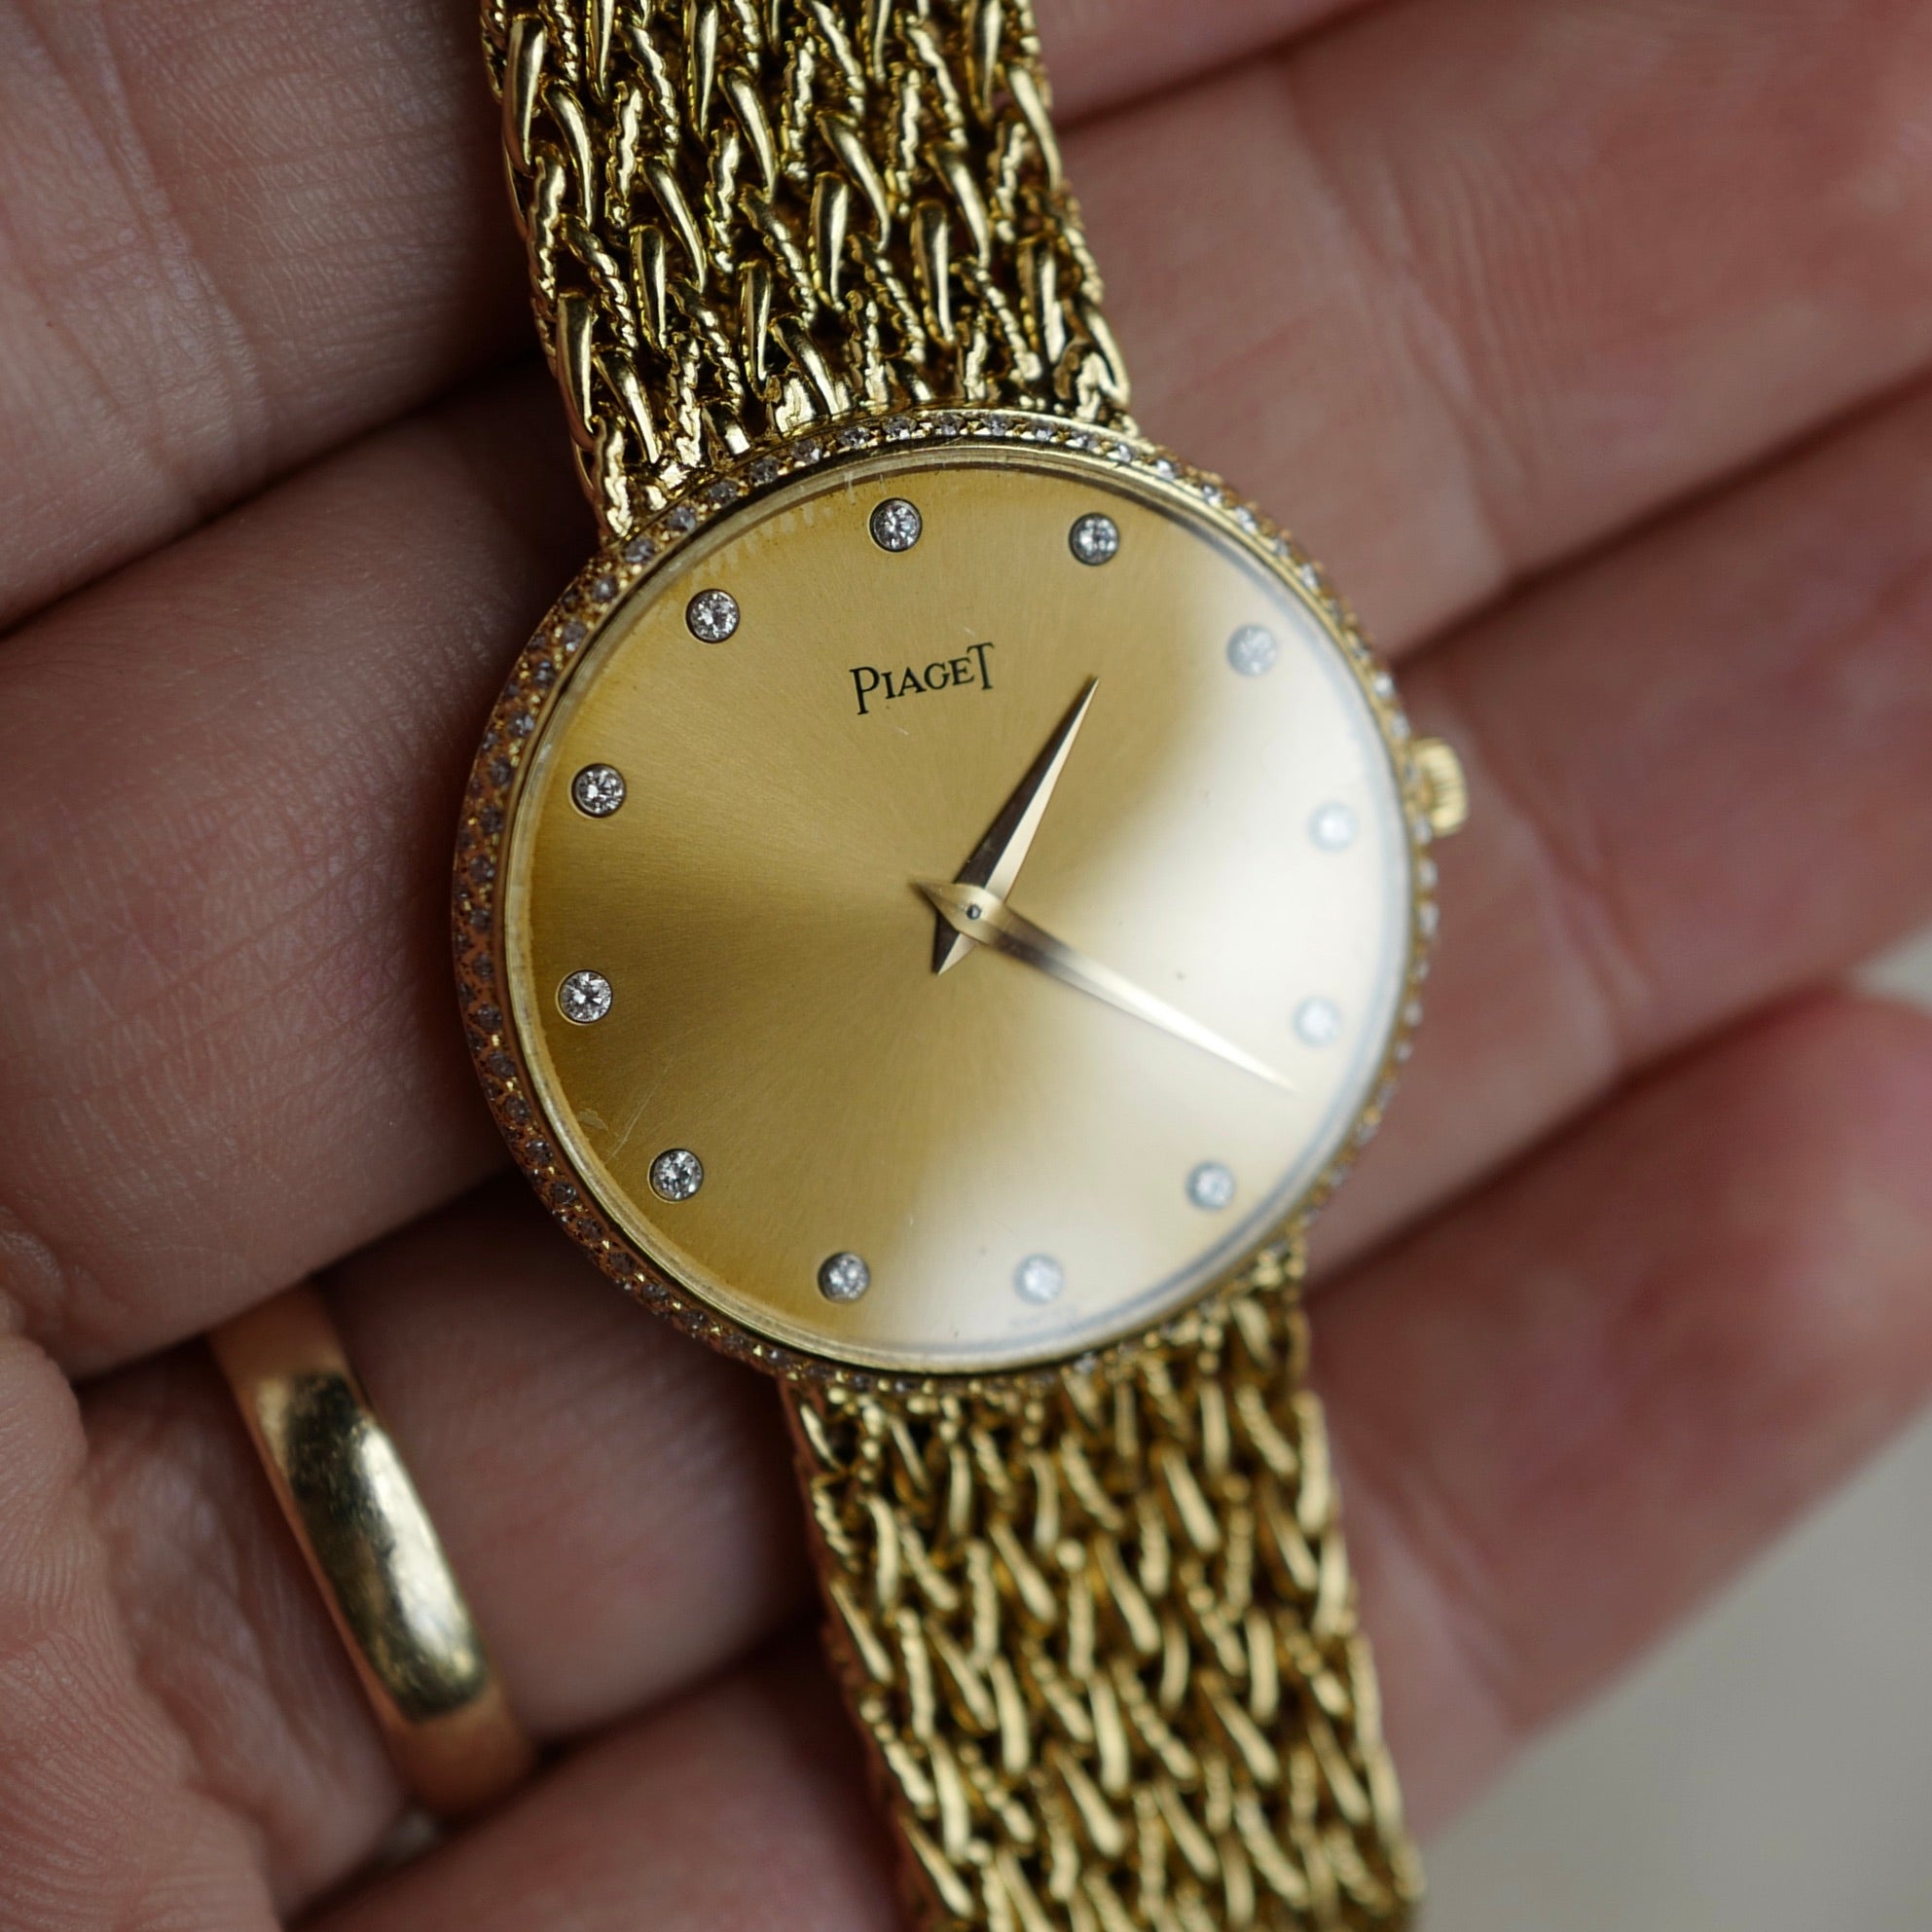 Piaget - Piaget Yellow Gold Bracelet Watch with Diamond Markers - The Keystone Watches